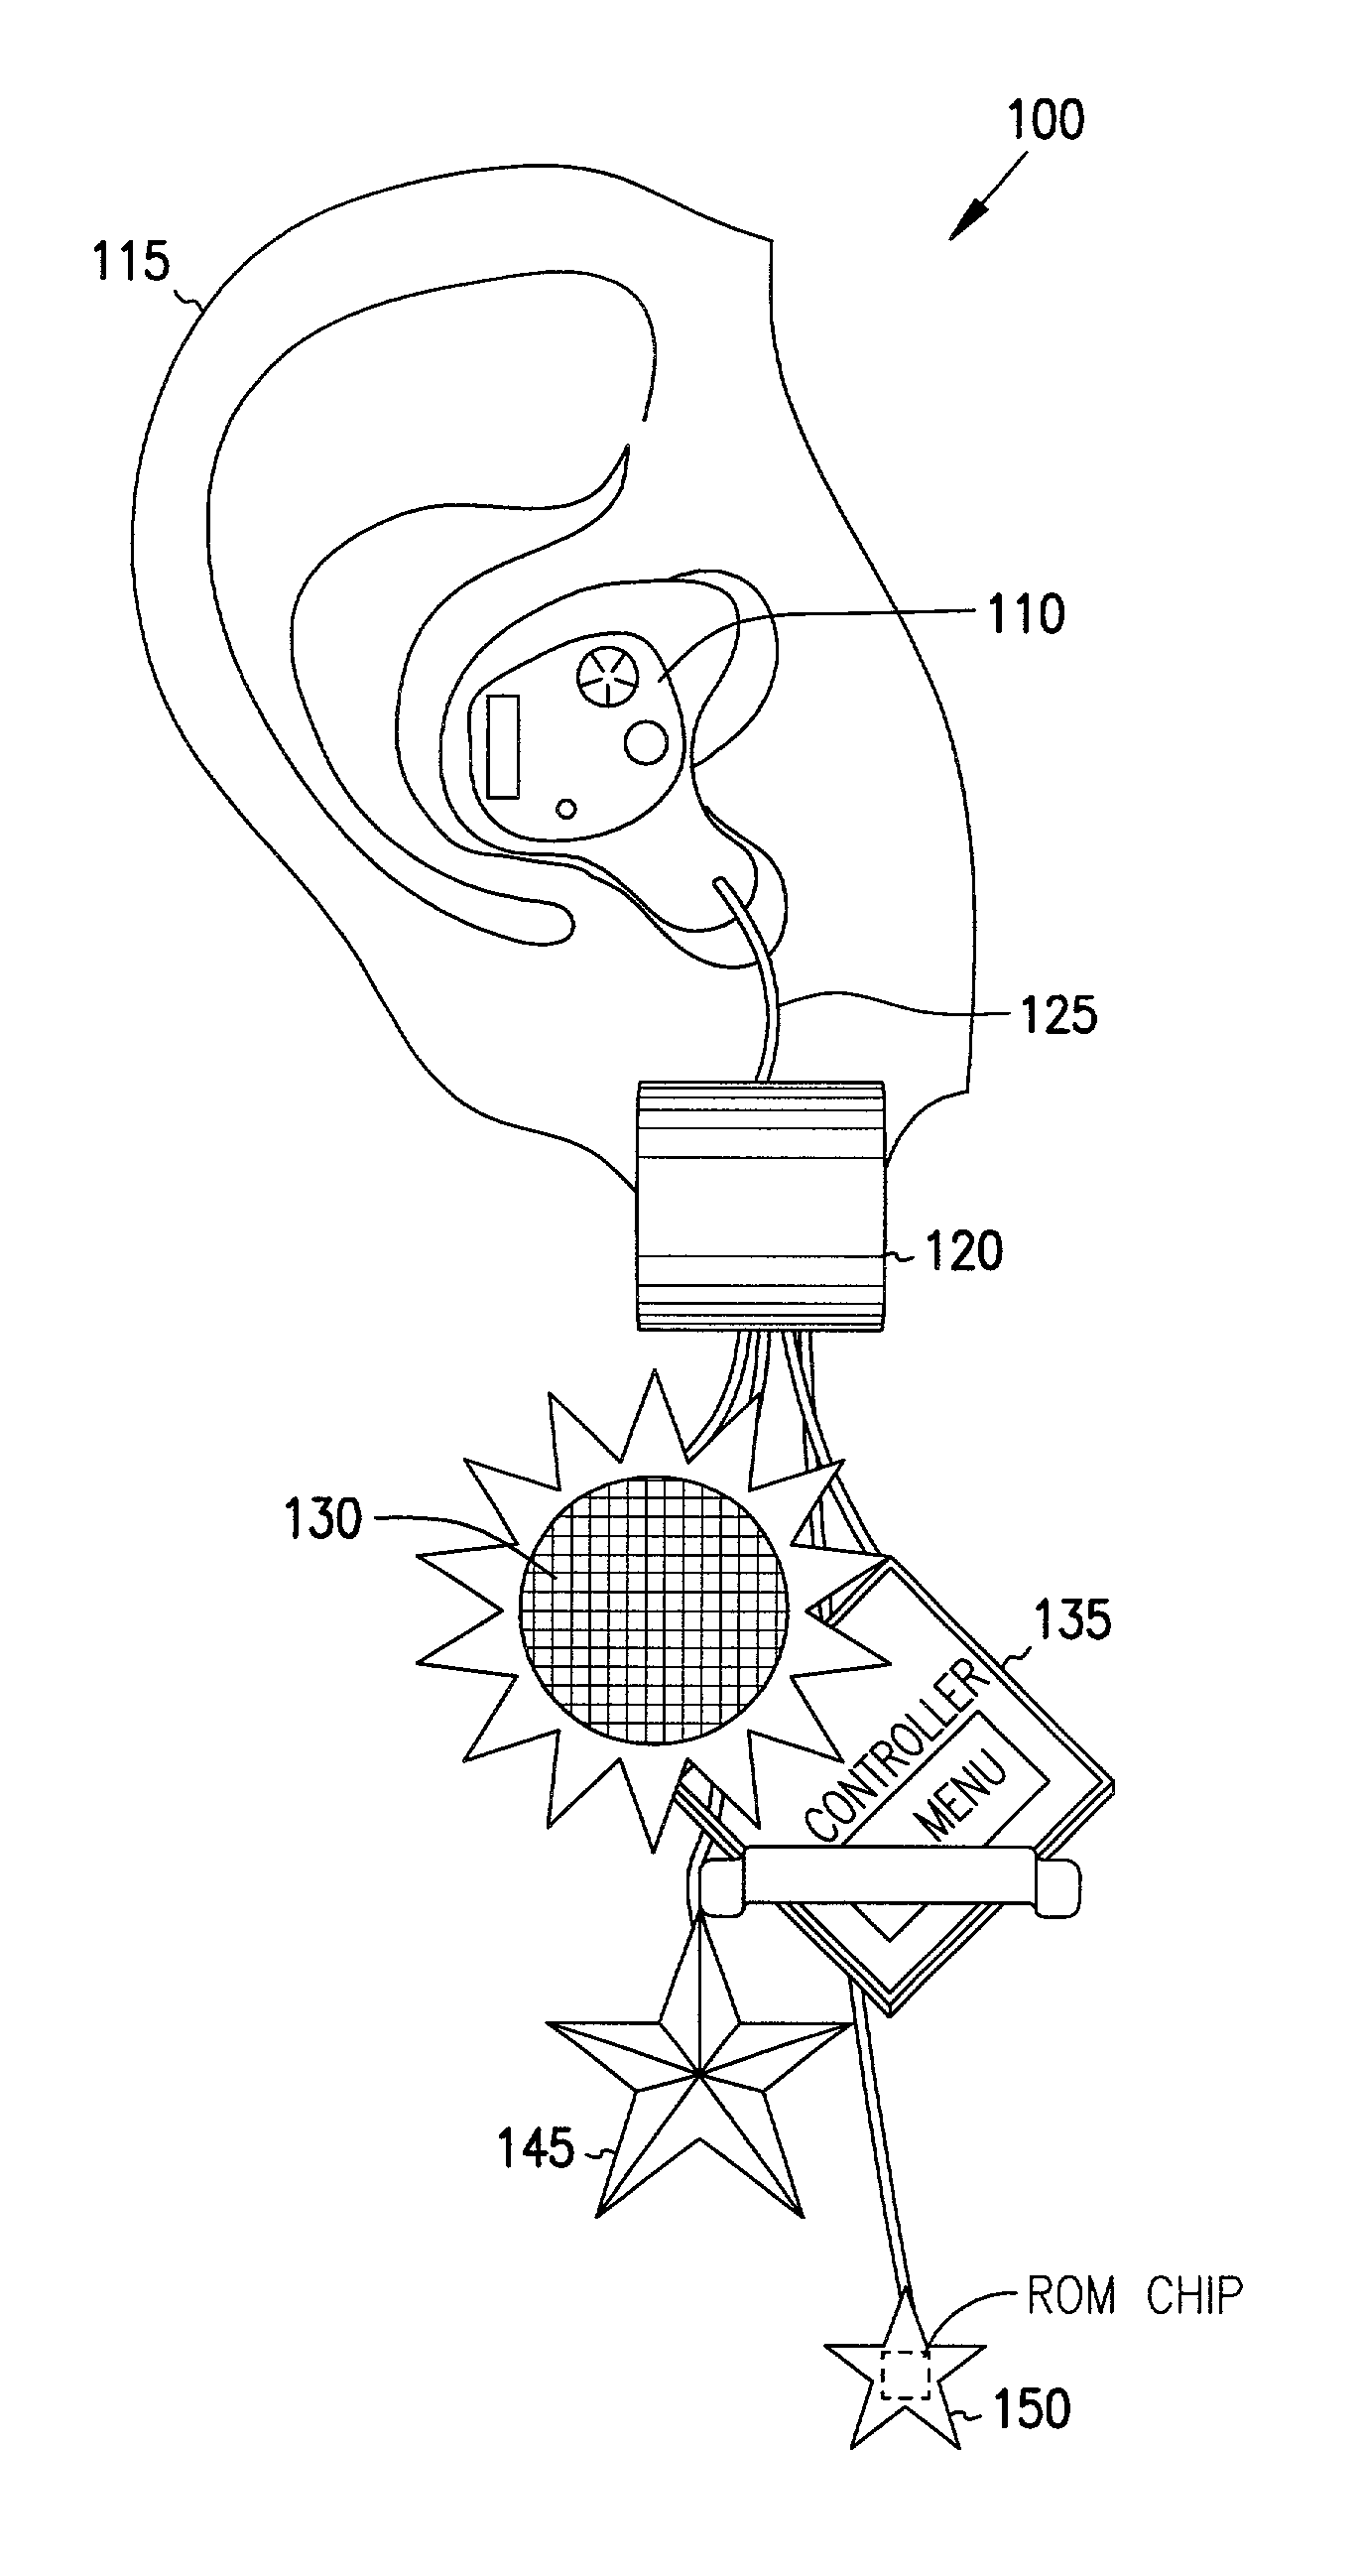 Audio earpiece and peripheral devices